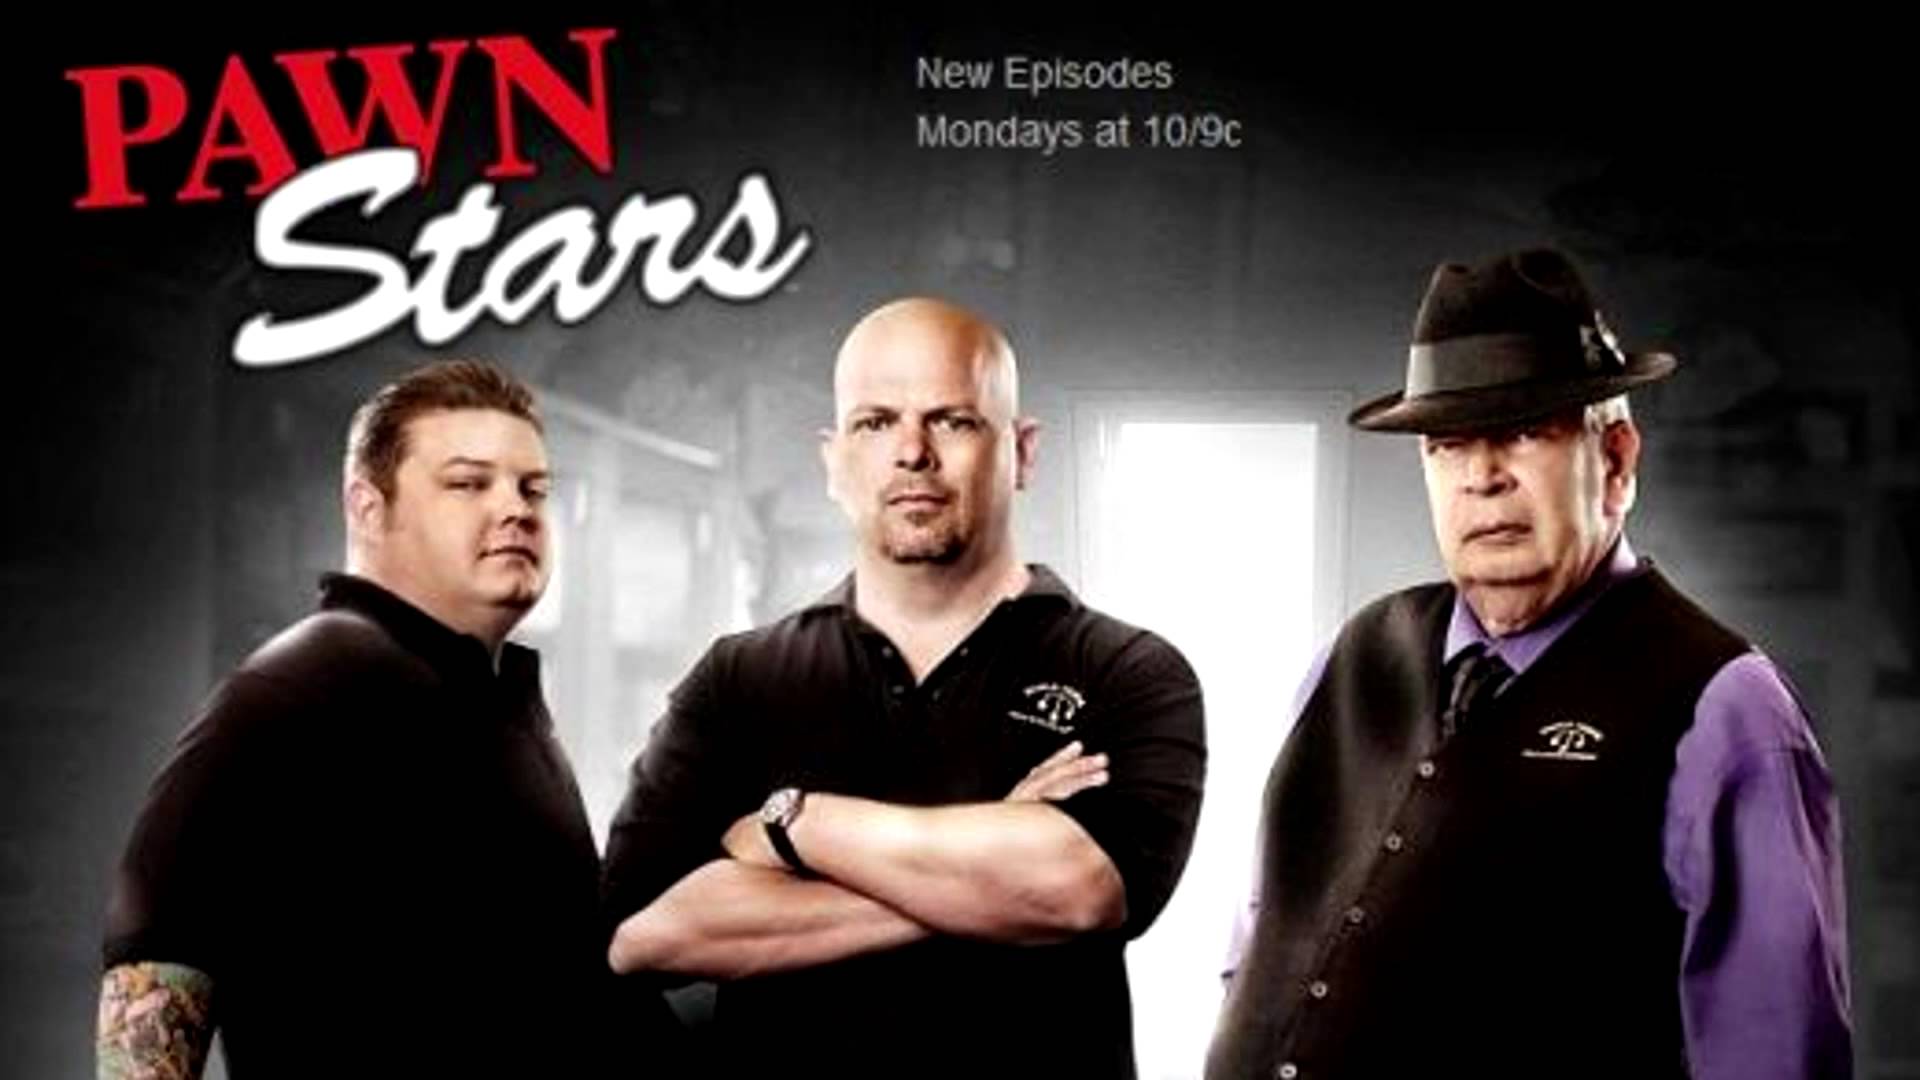 Nice wallpapers Pawn Stars 1920x1080px